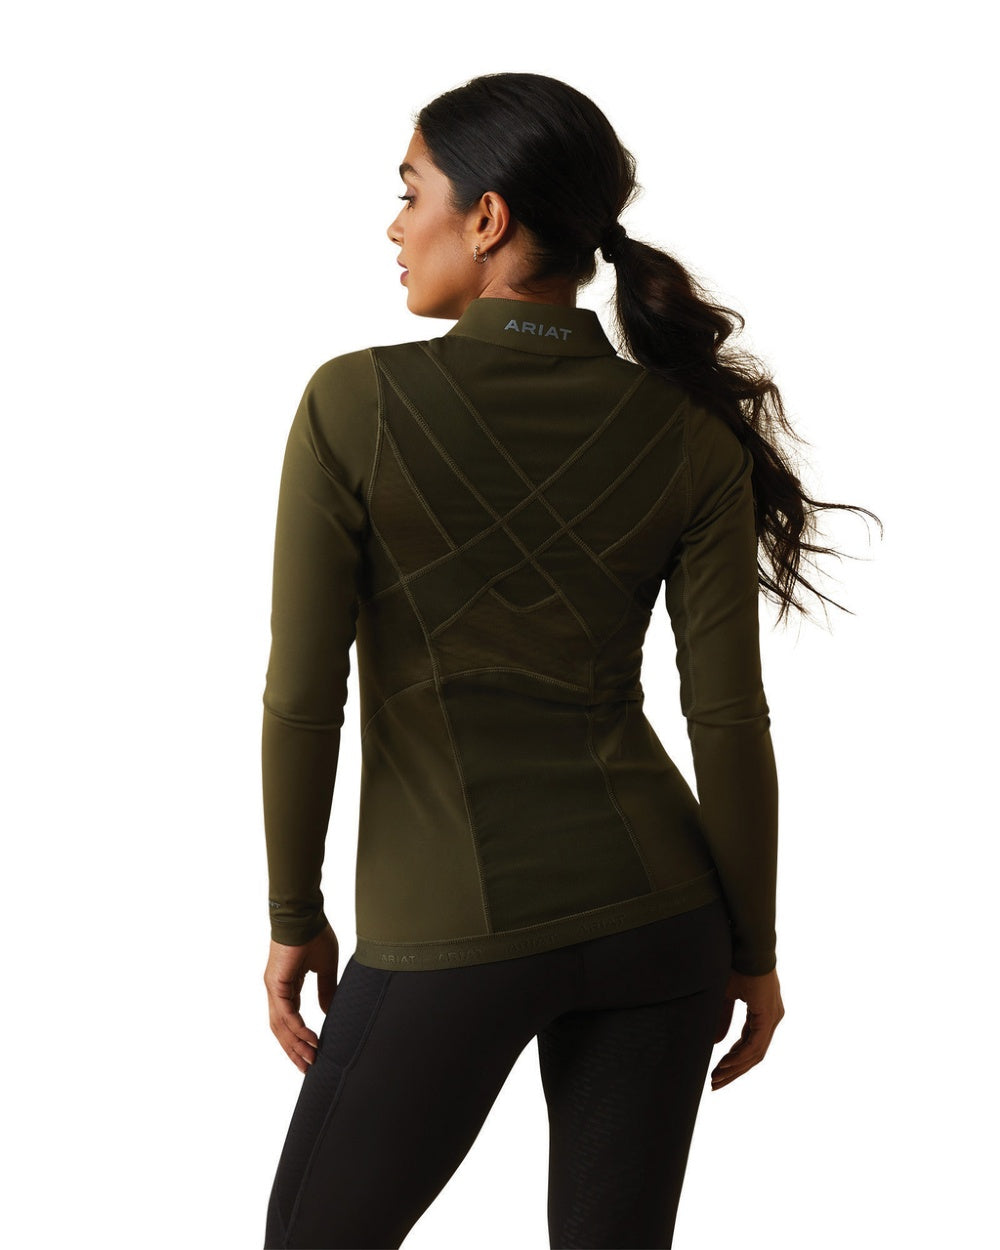 Ariat Womens Ascent 1/4 Zip Base Layer in Relic 